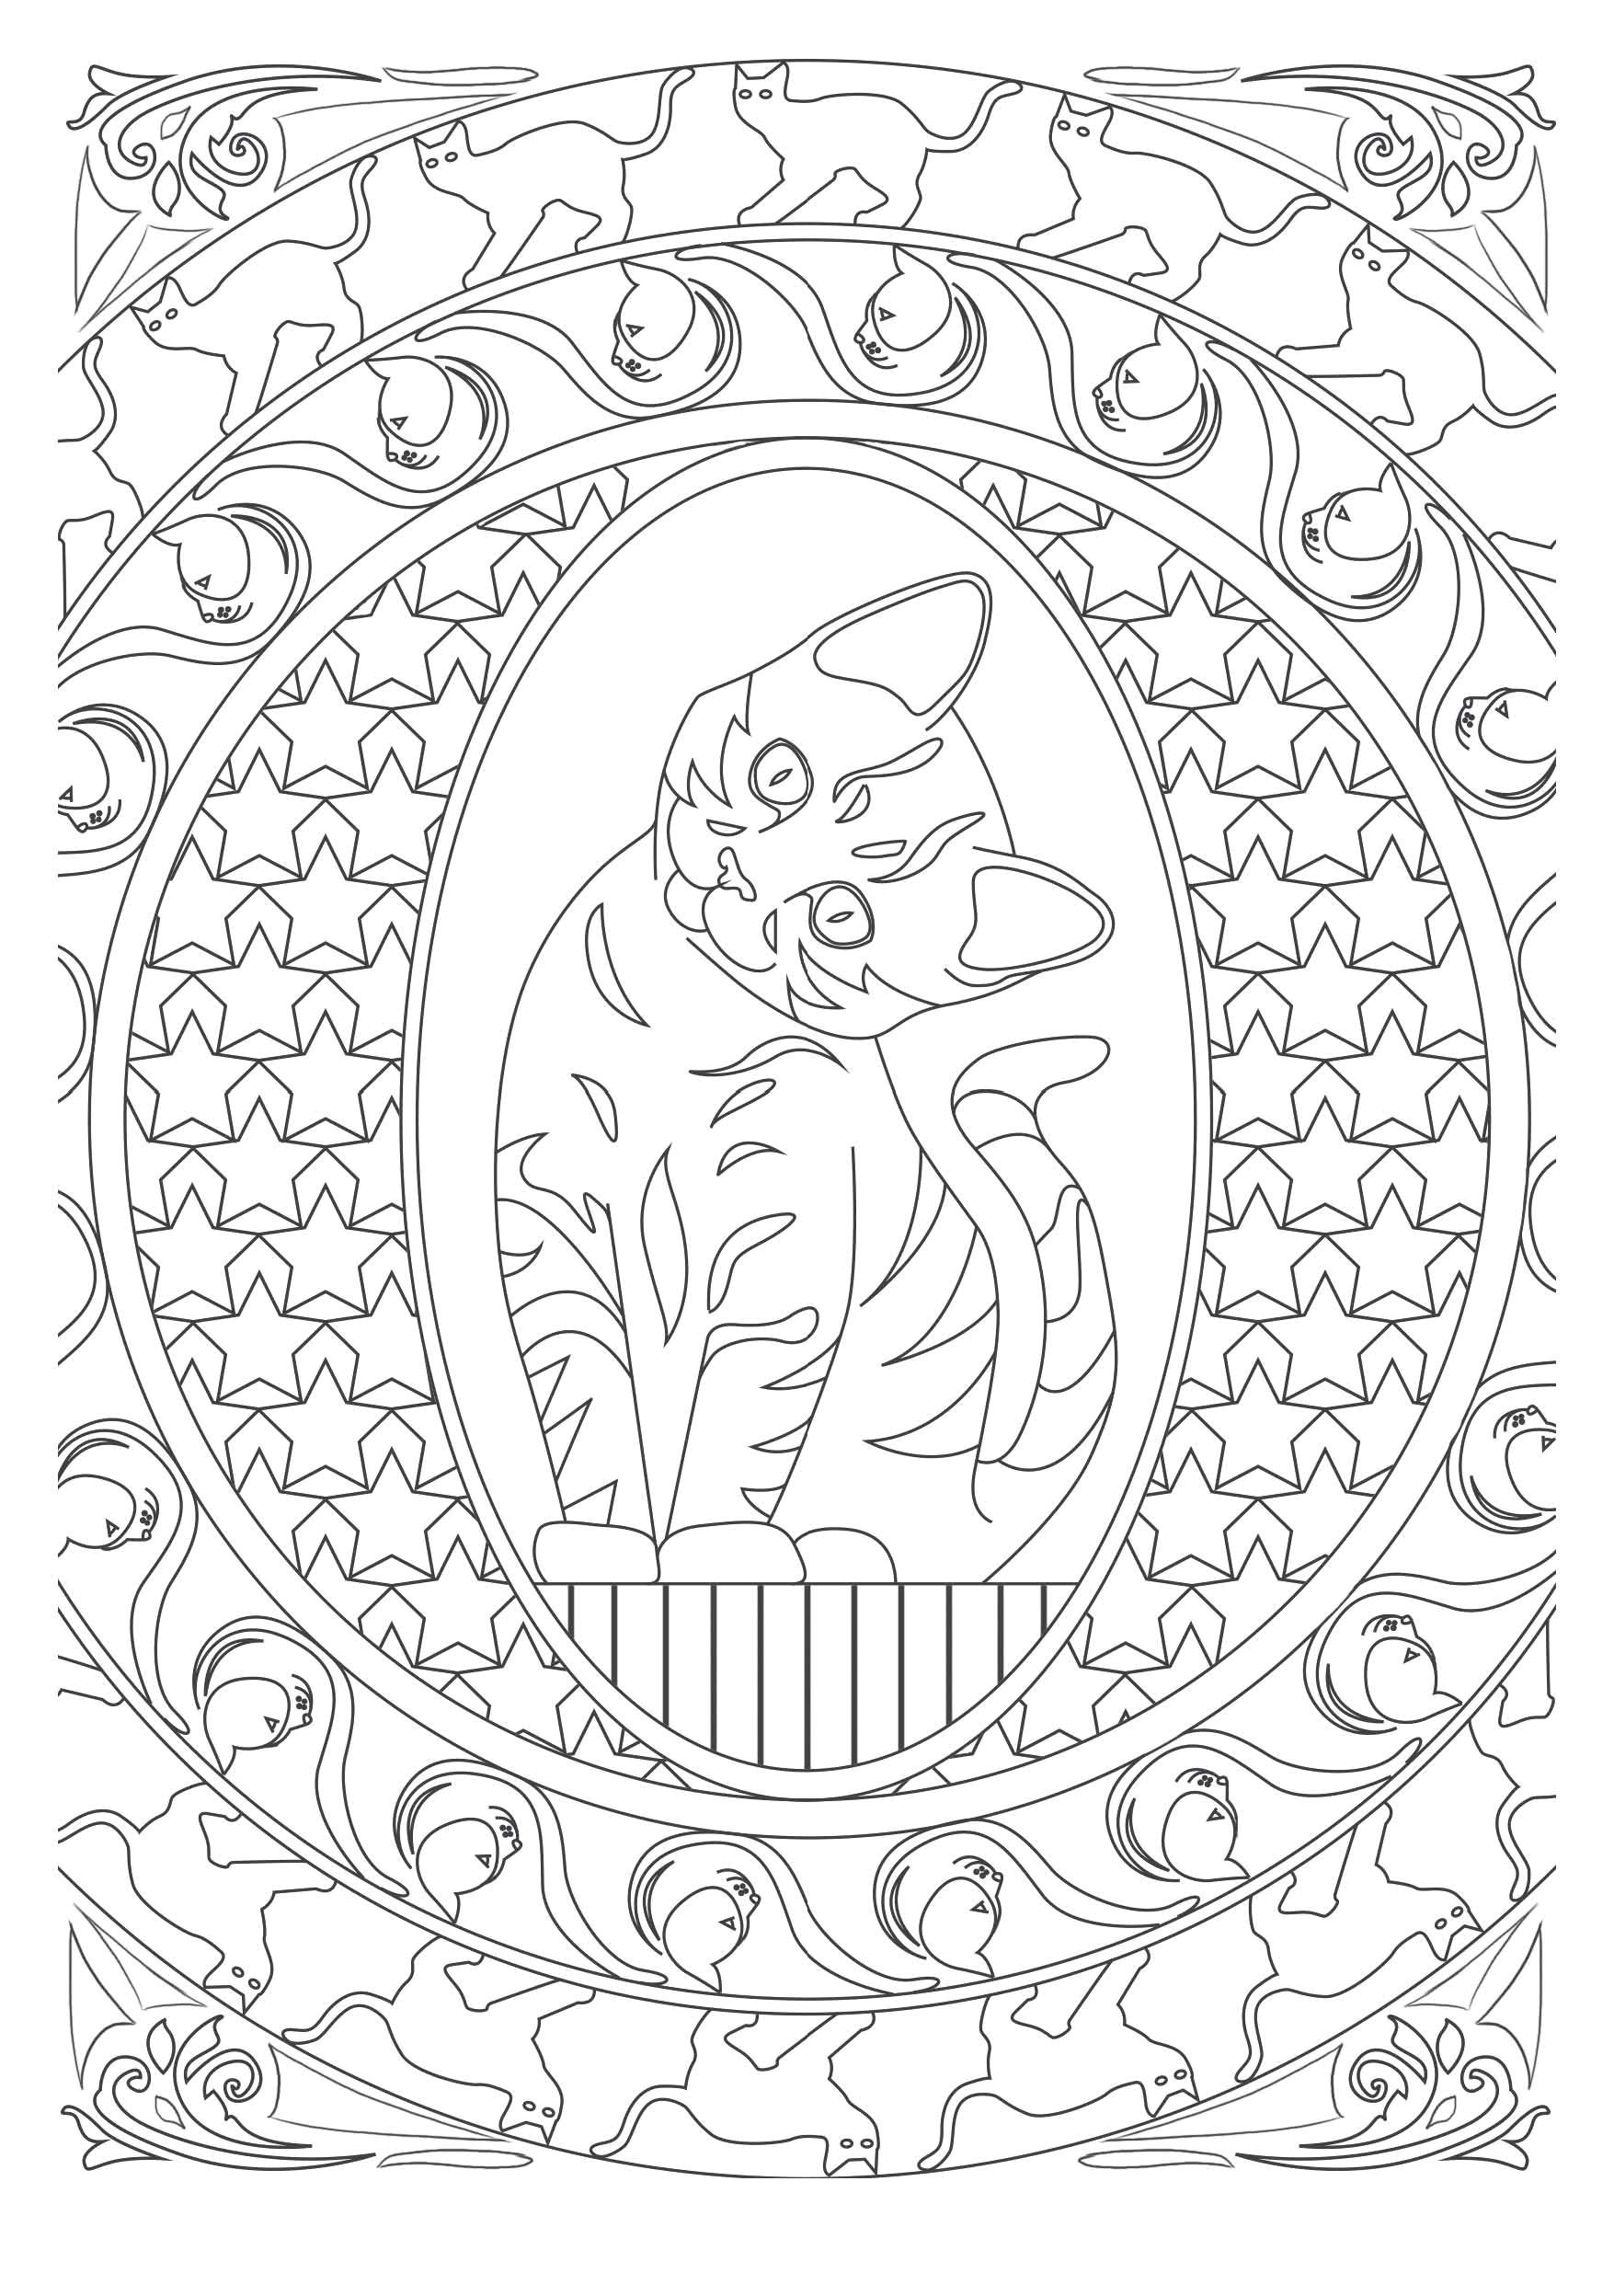 Coloriage Destressant Chat Art therapie Chat therapie 100 Coloriages Anti Stress French